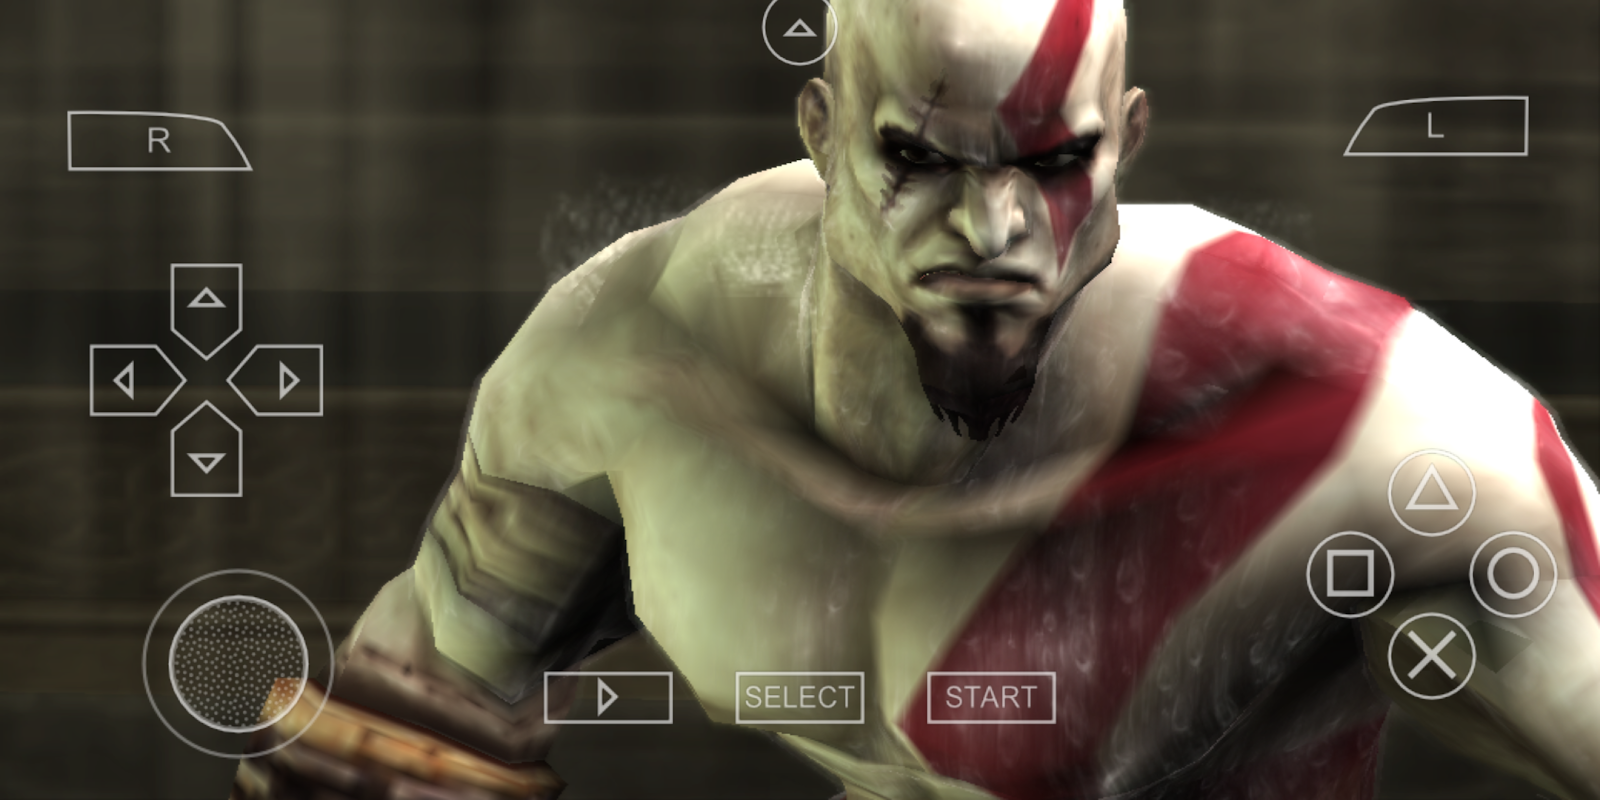 god of war 3 on android ppsspp download gameplay 2gb